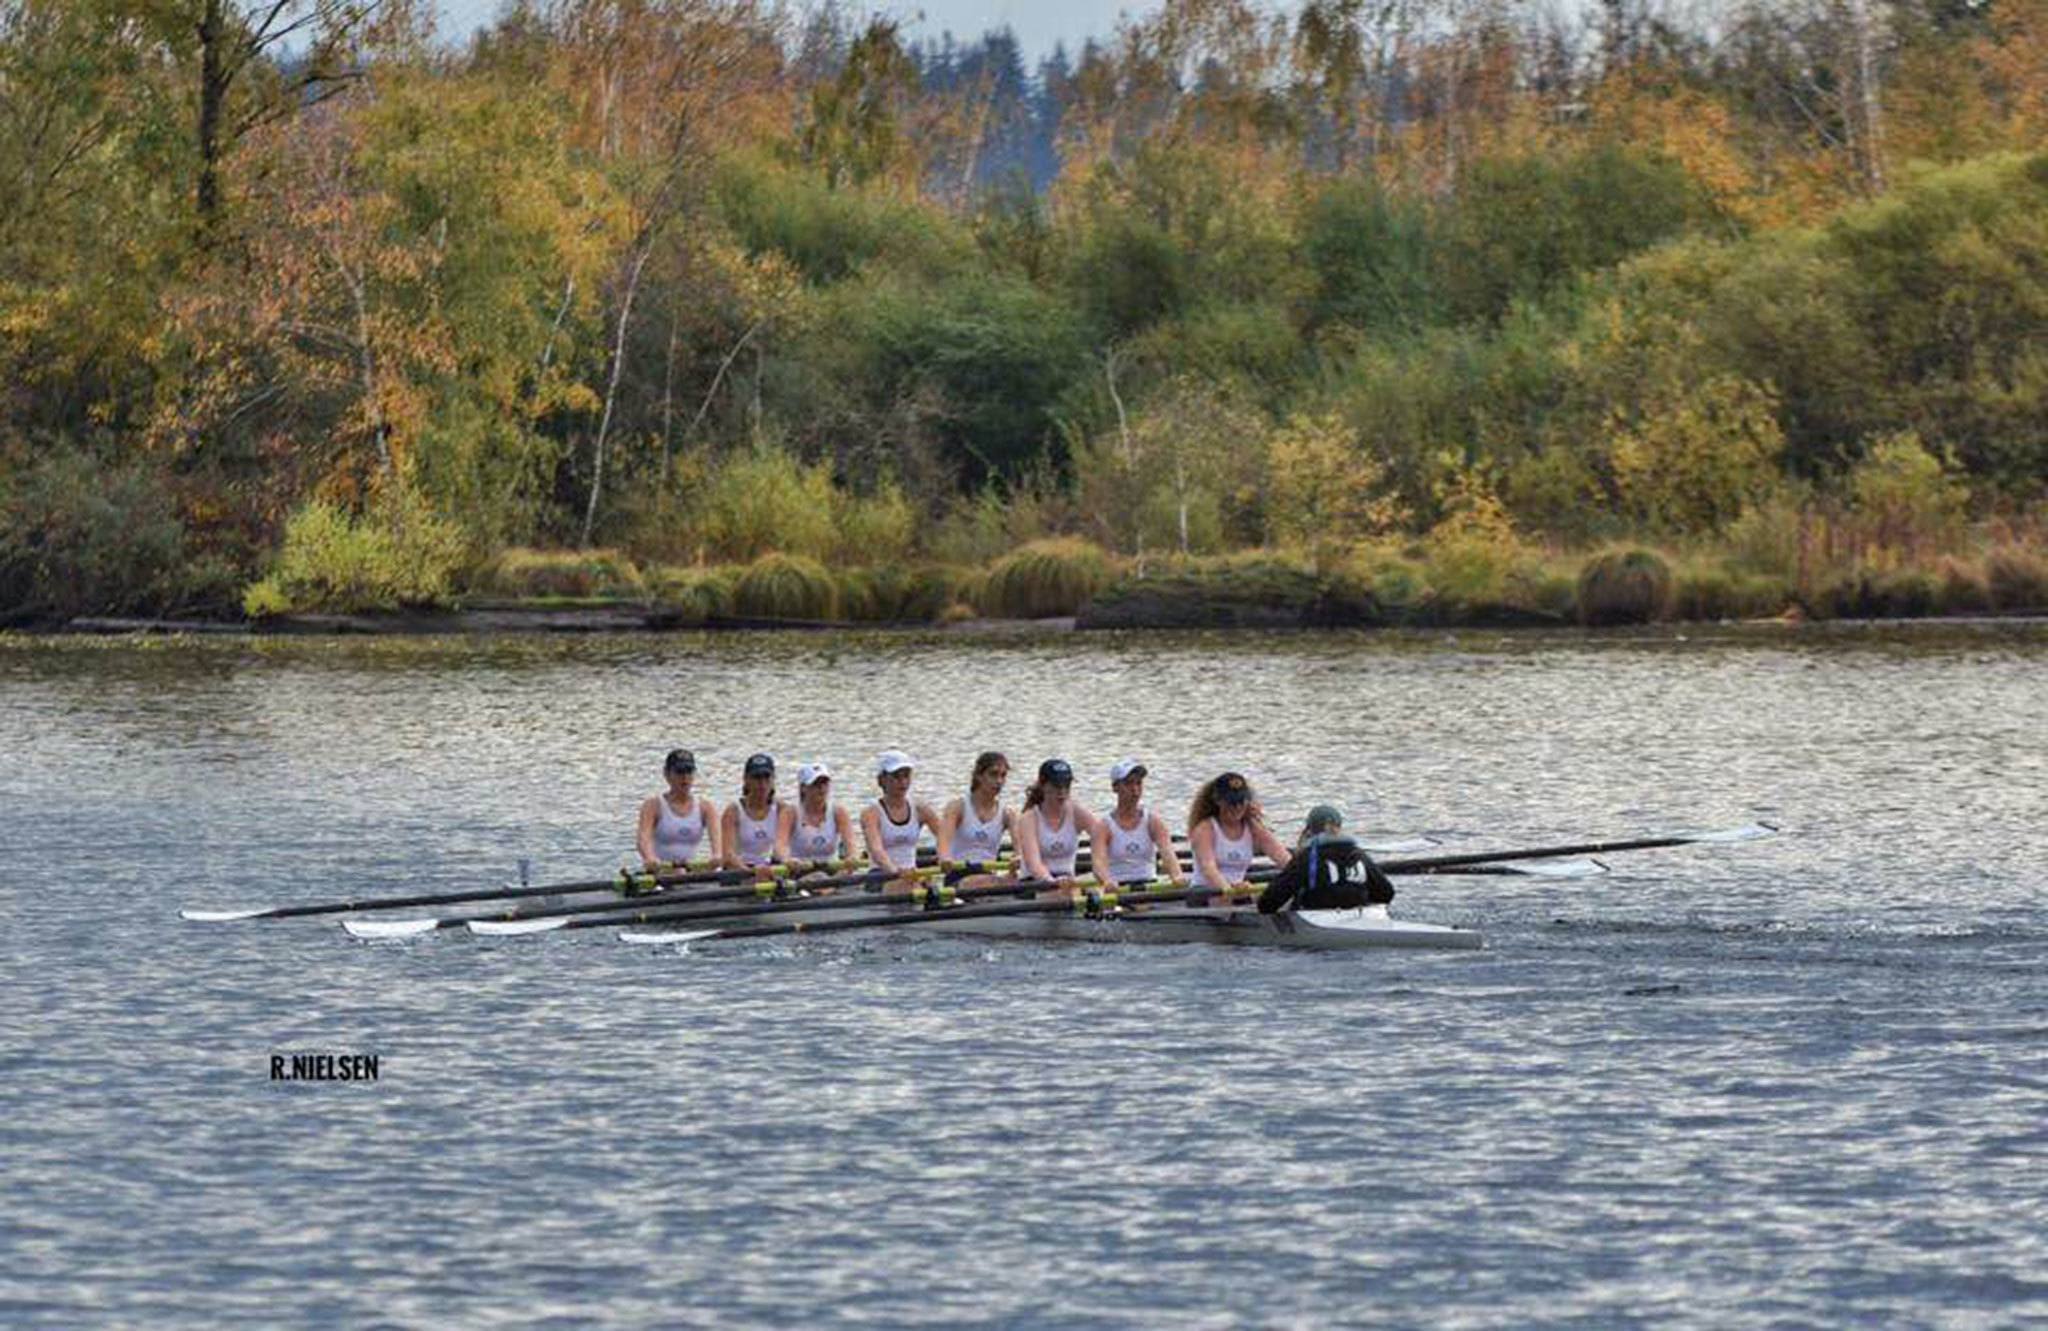 Bainbridge rowers prevail at Head of the Lake and Frostbite Regattas